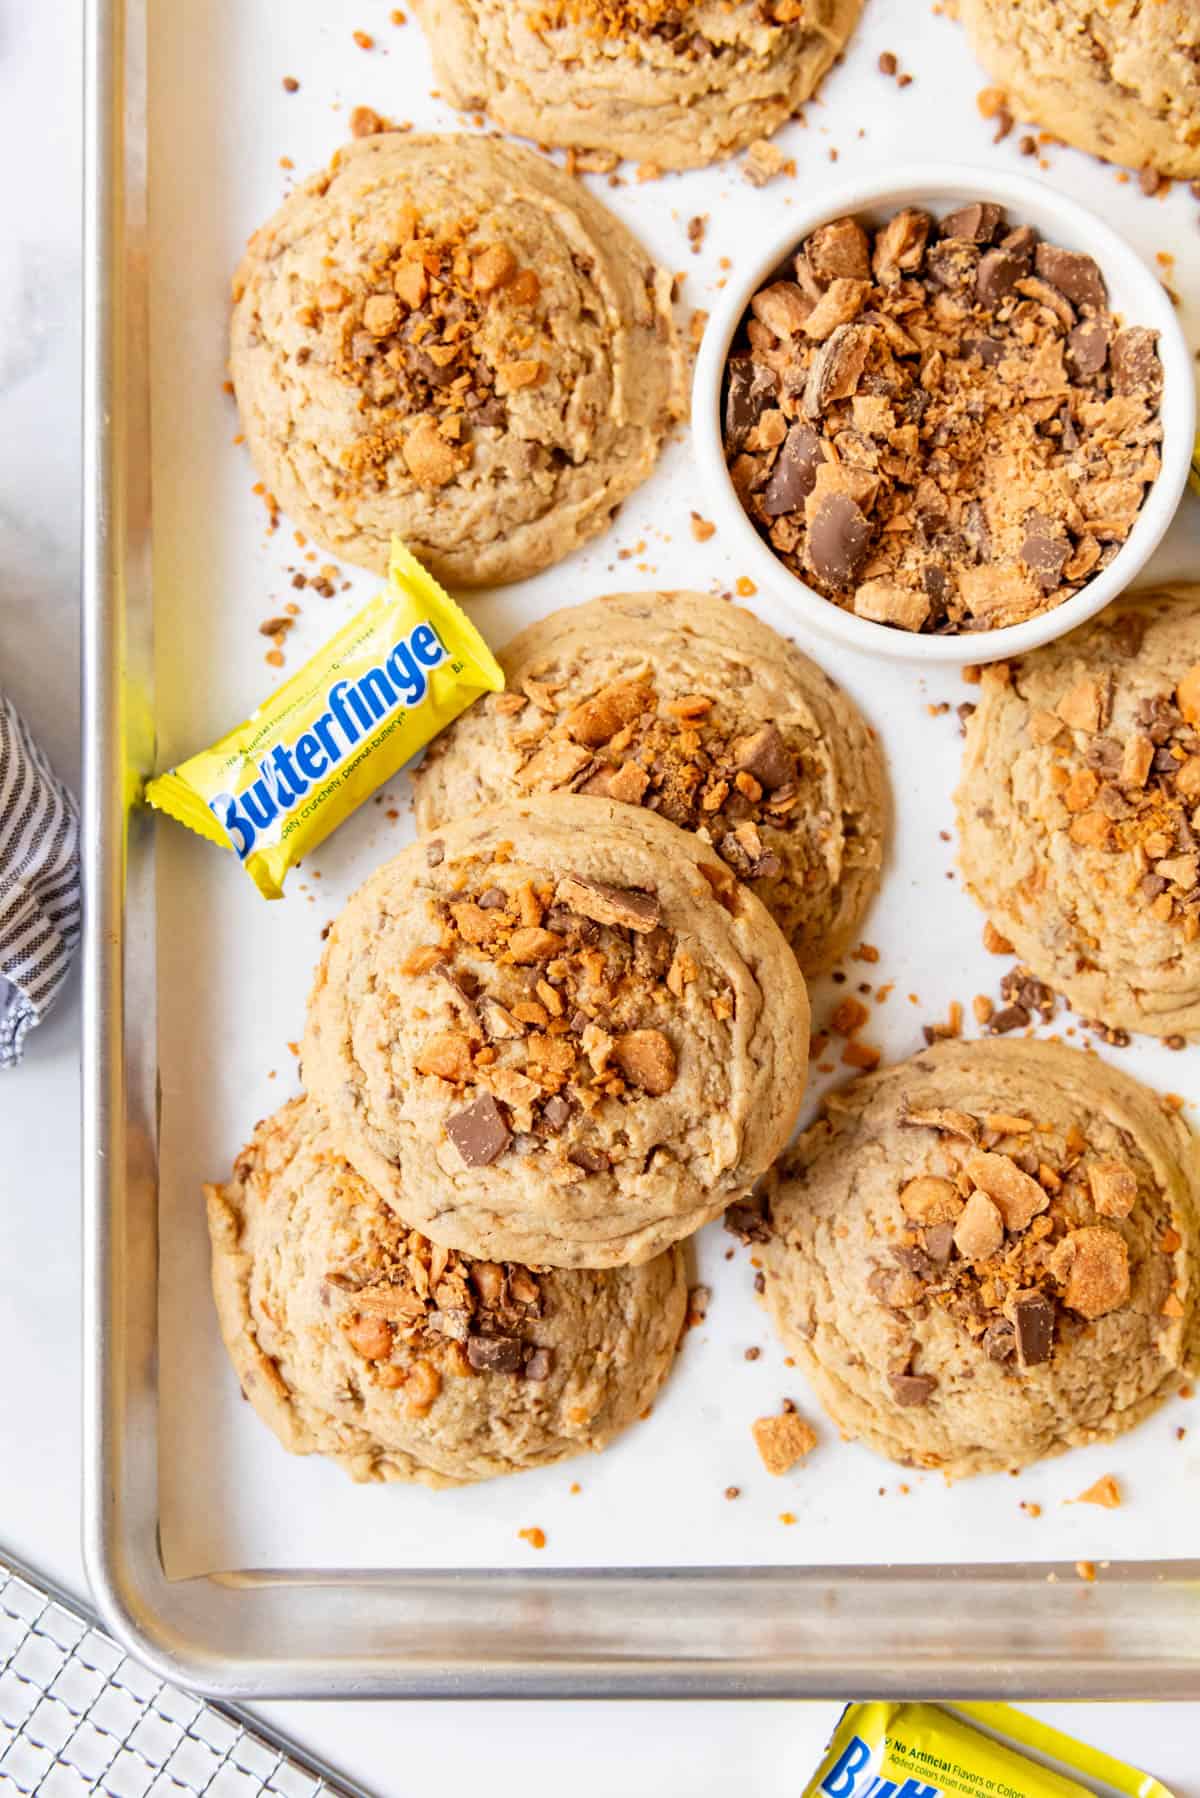 An overhead image of butterfingers cookies on a baking sheet with fun size butterfingers candy bars near them.